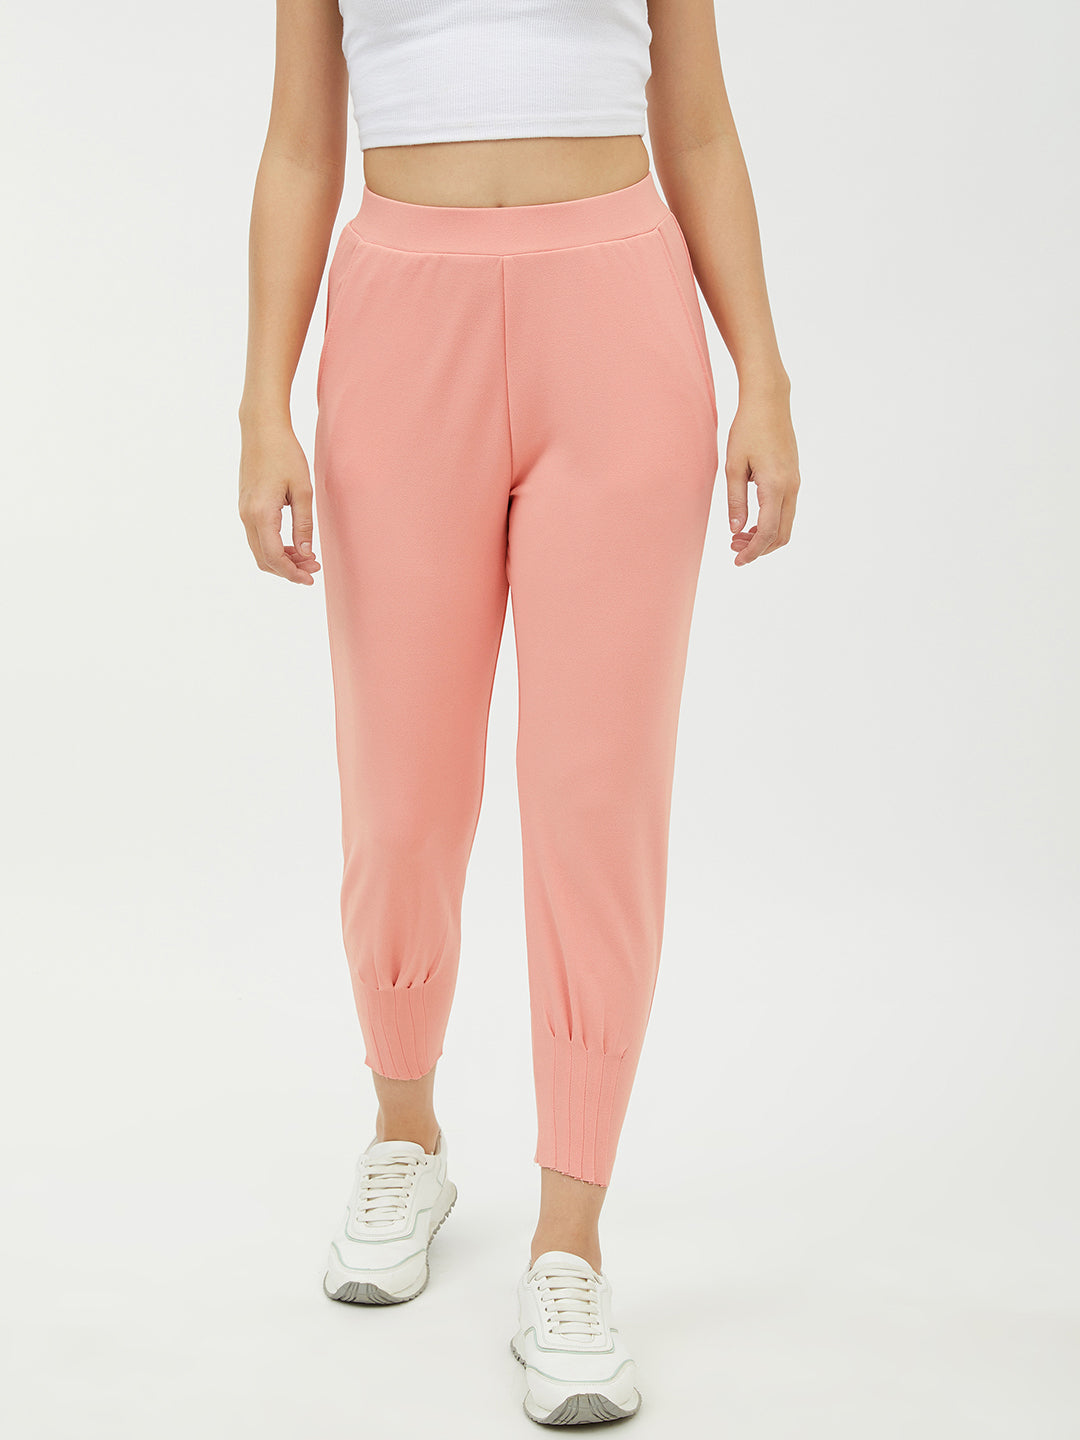 Women's Pink Jogger Style Trousers